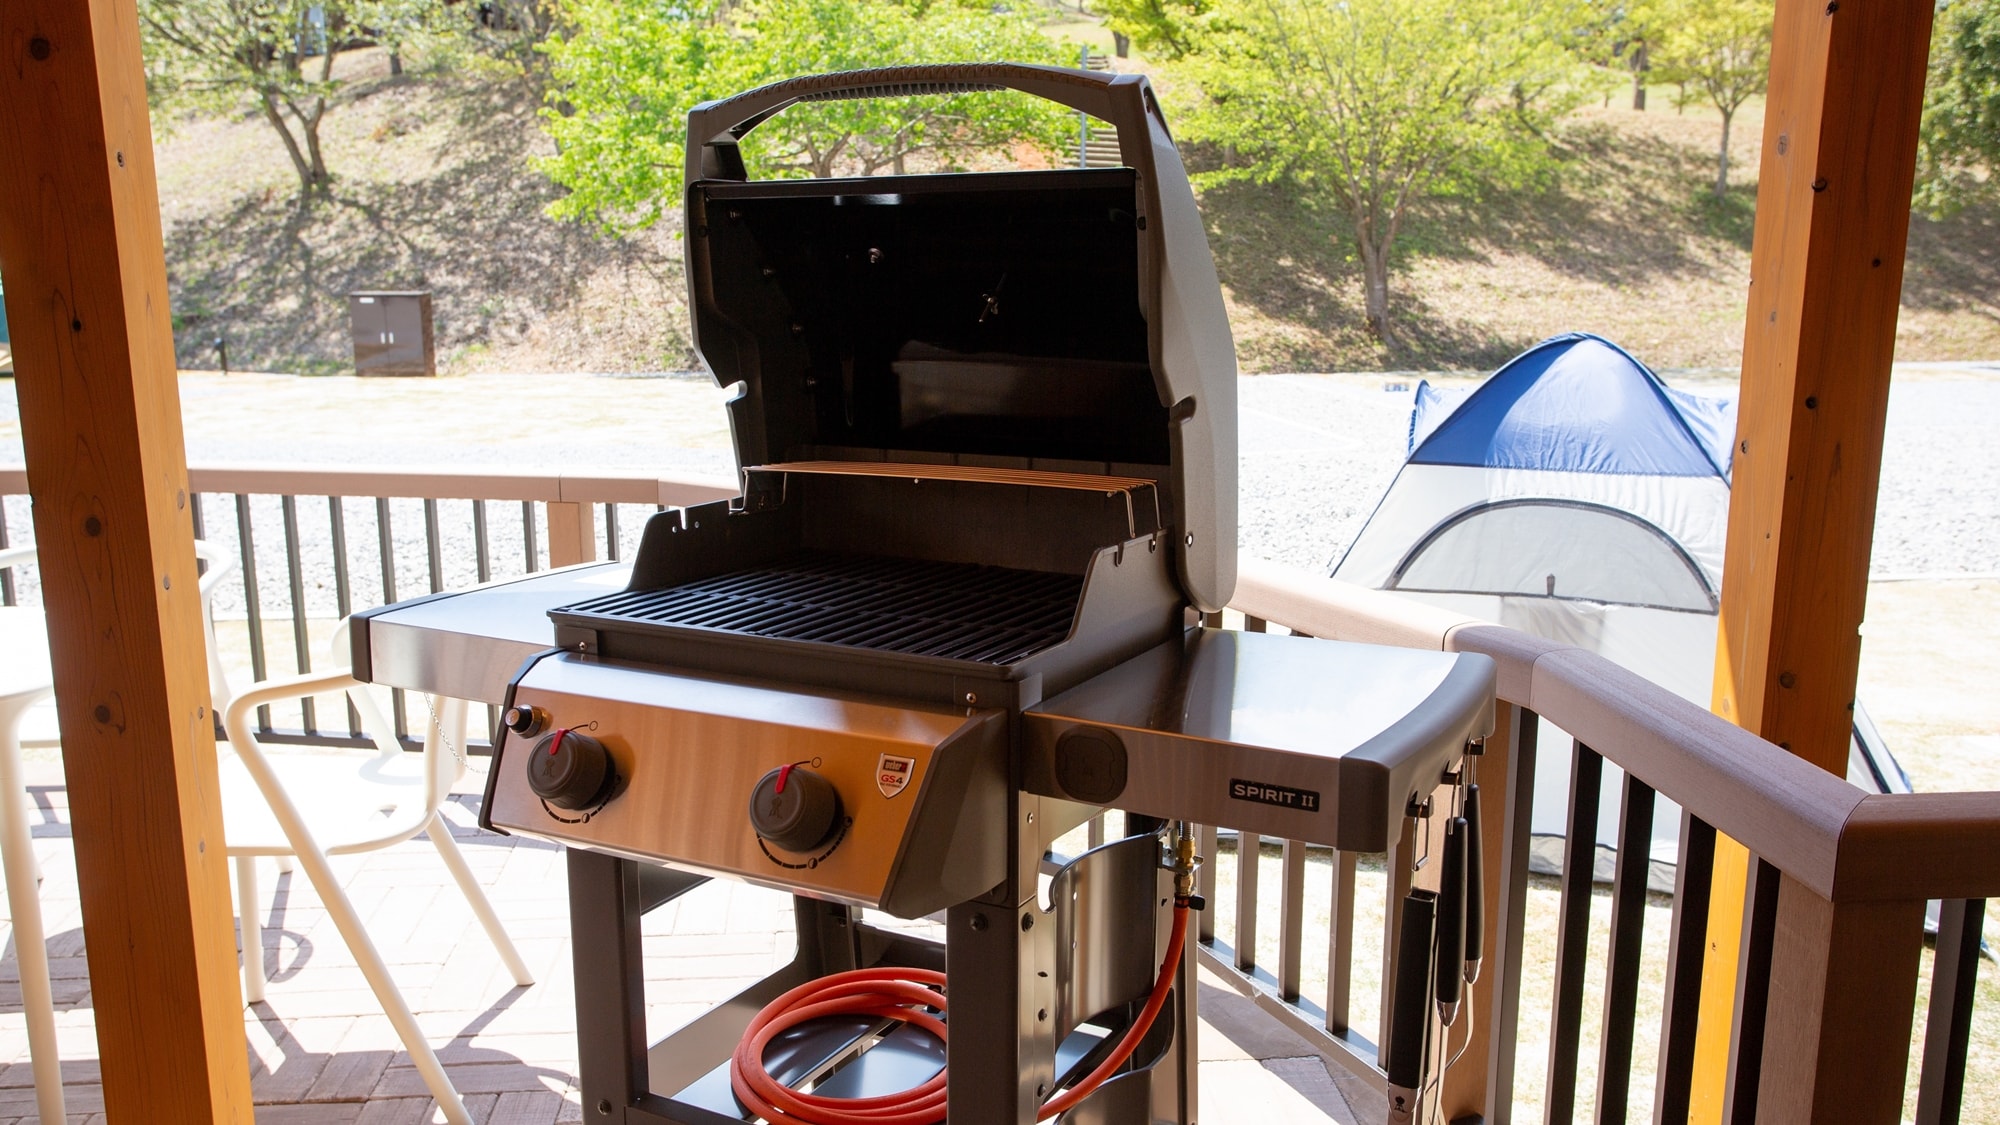 * [Grand Cabin] Permanent gas grill. Since it doesn't use charcoal, you don't have to worry about the smell of charcoal on your hair or clothes!